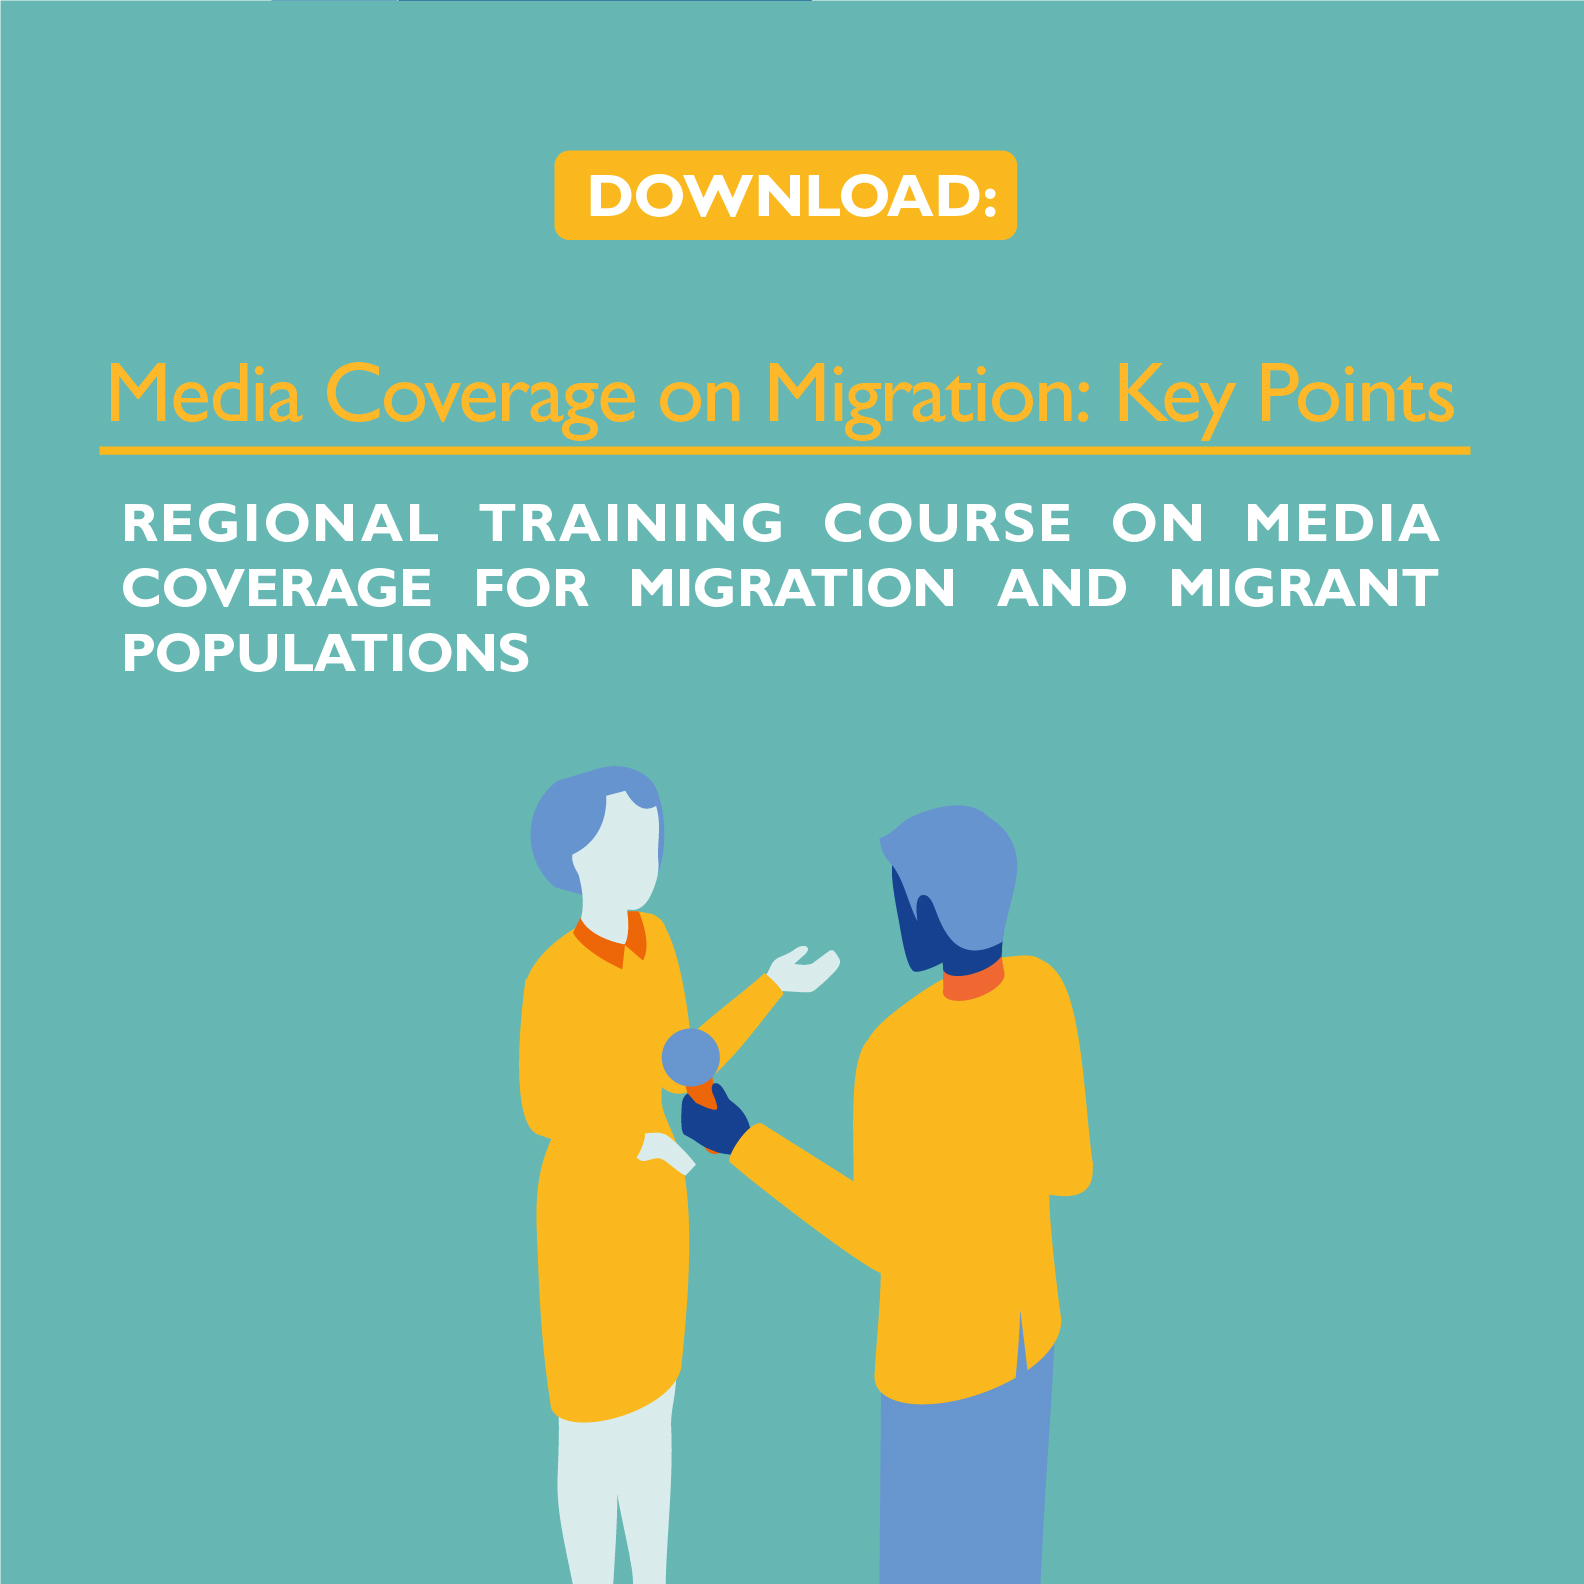 Download: Regional training course on media coverage for migration and migrant populations